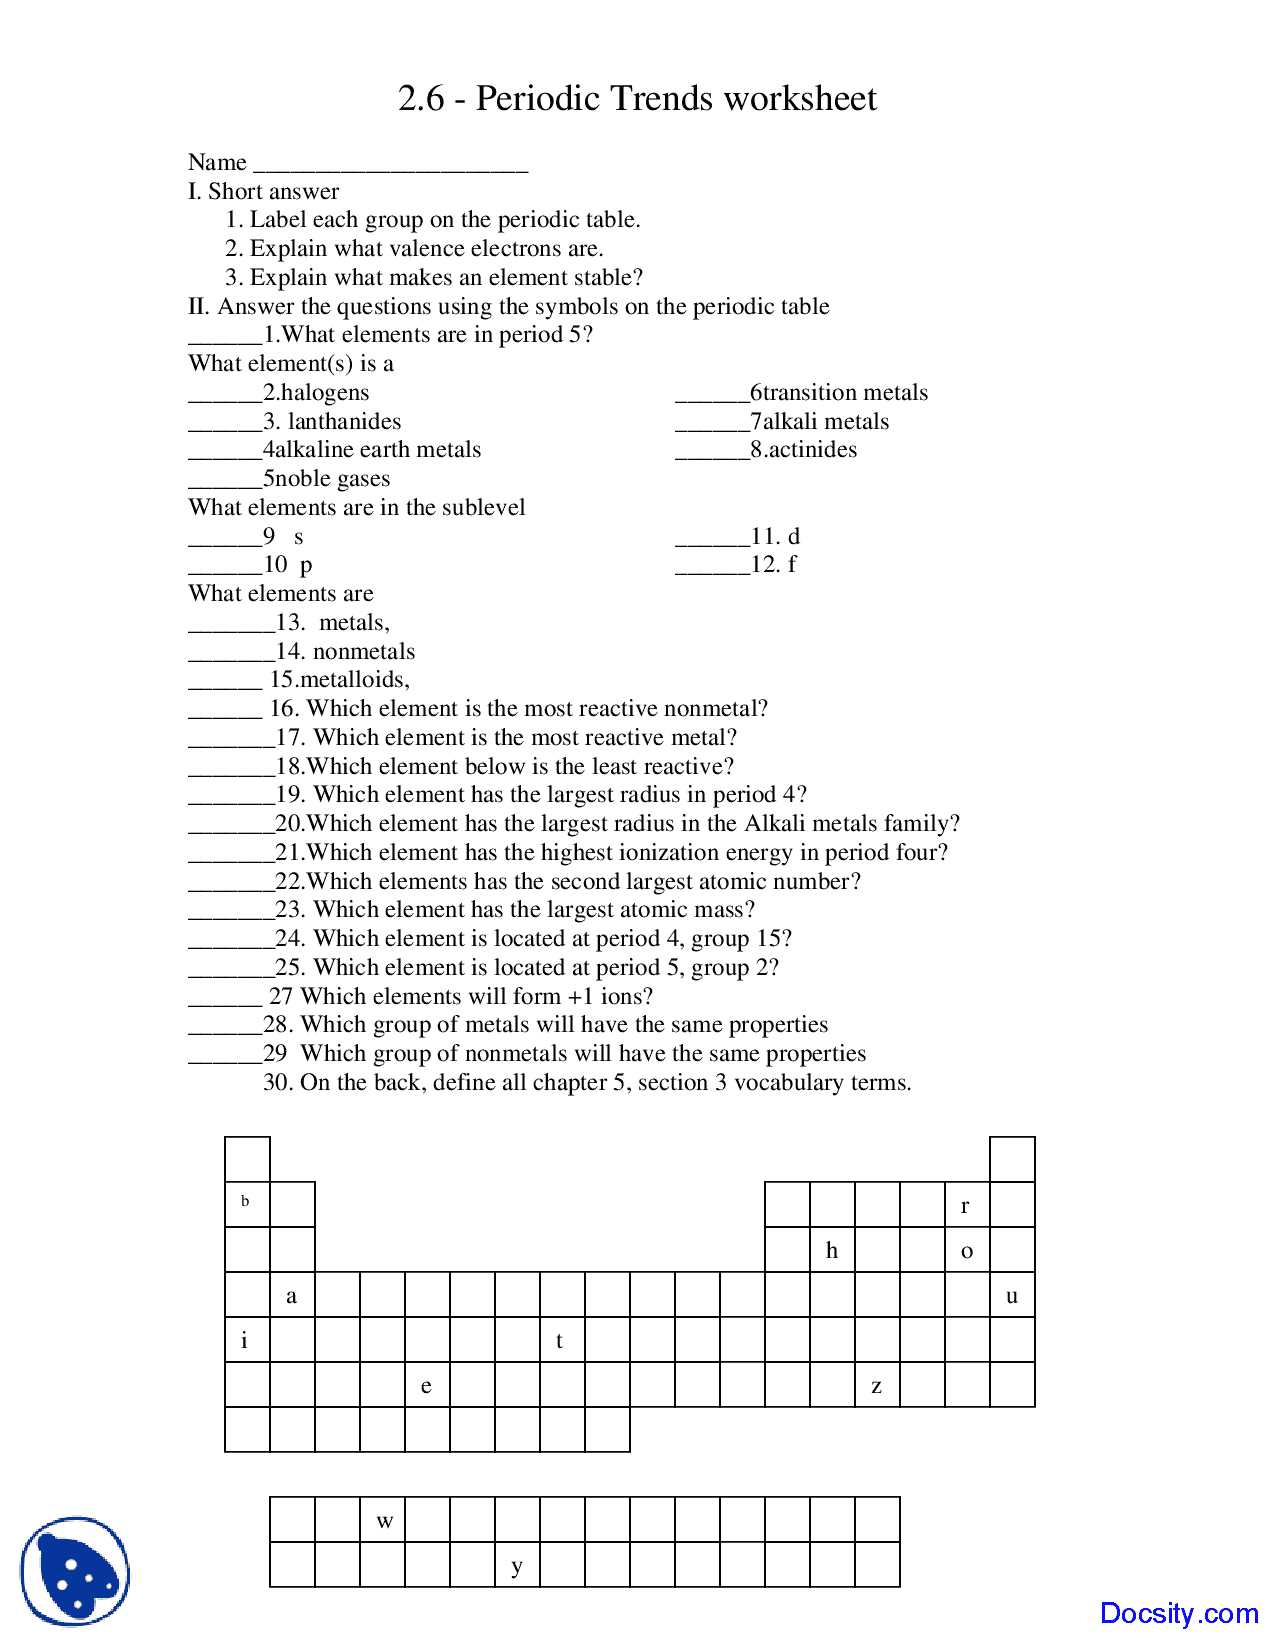 Limiting Reagent Worksheet 2 with Periodic Trends Worksheet General Chemistry Quiz Docsity Answers